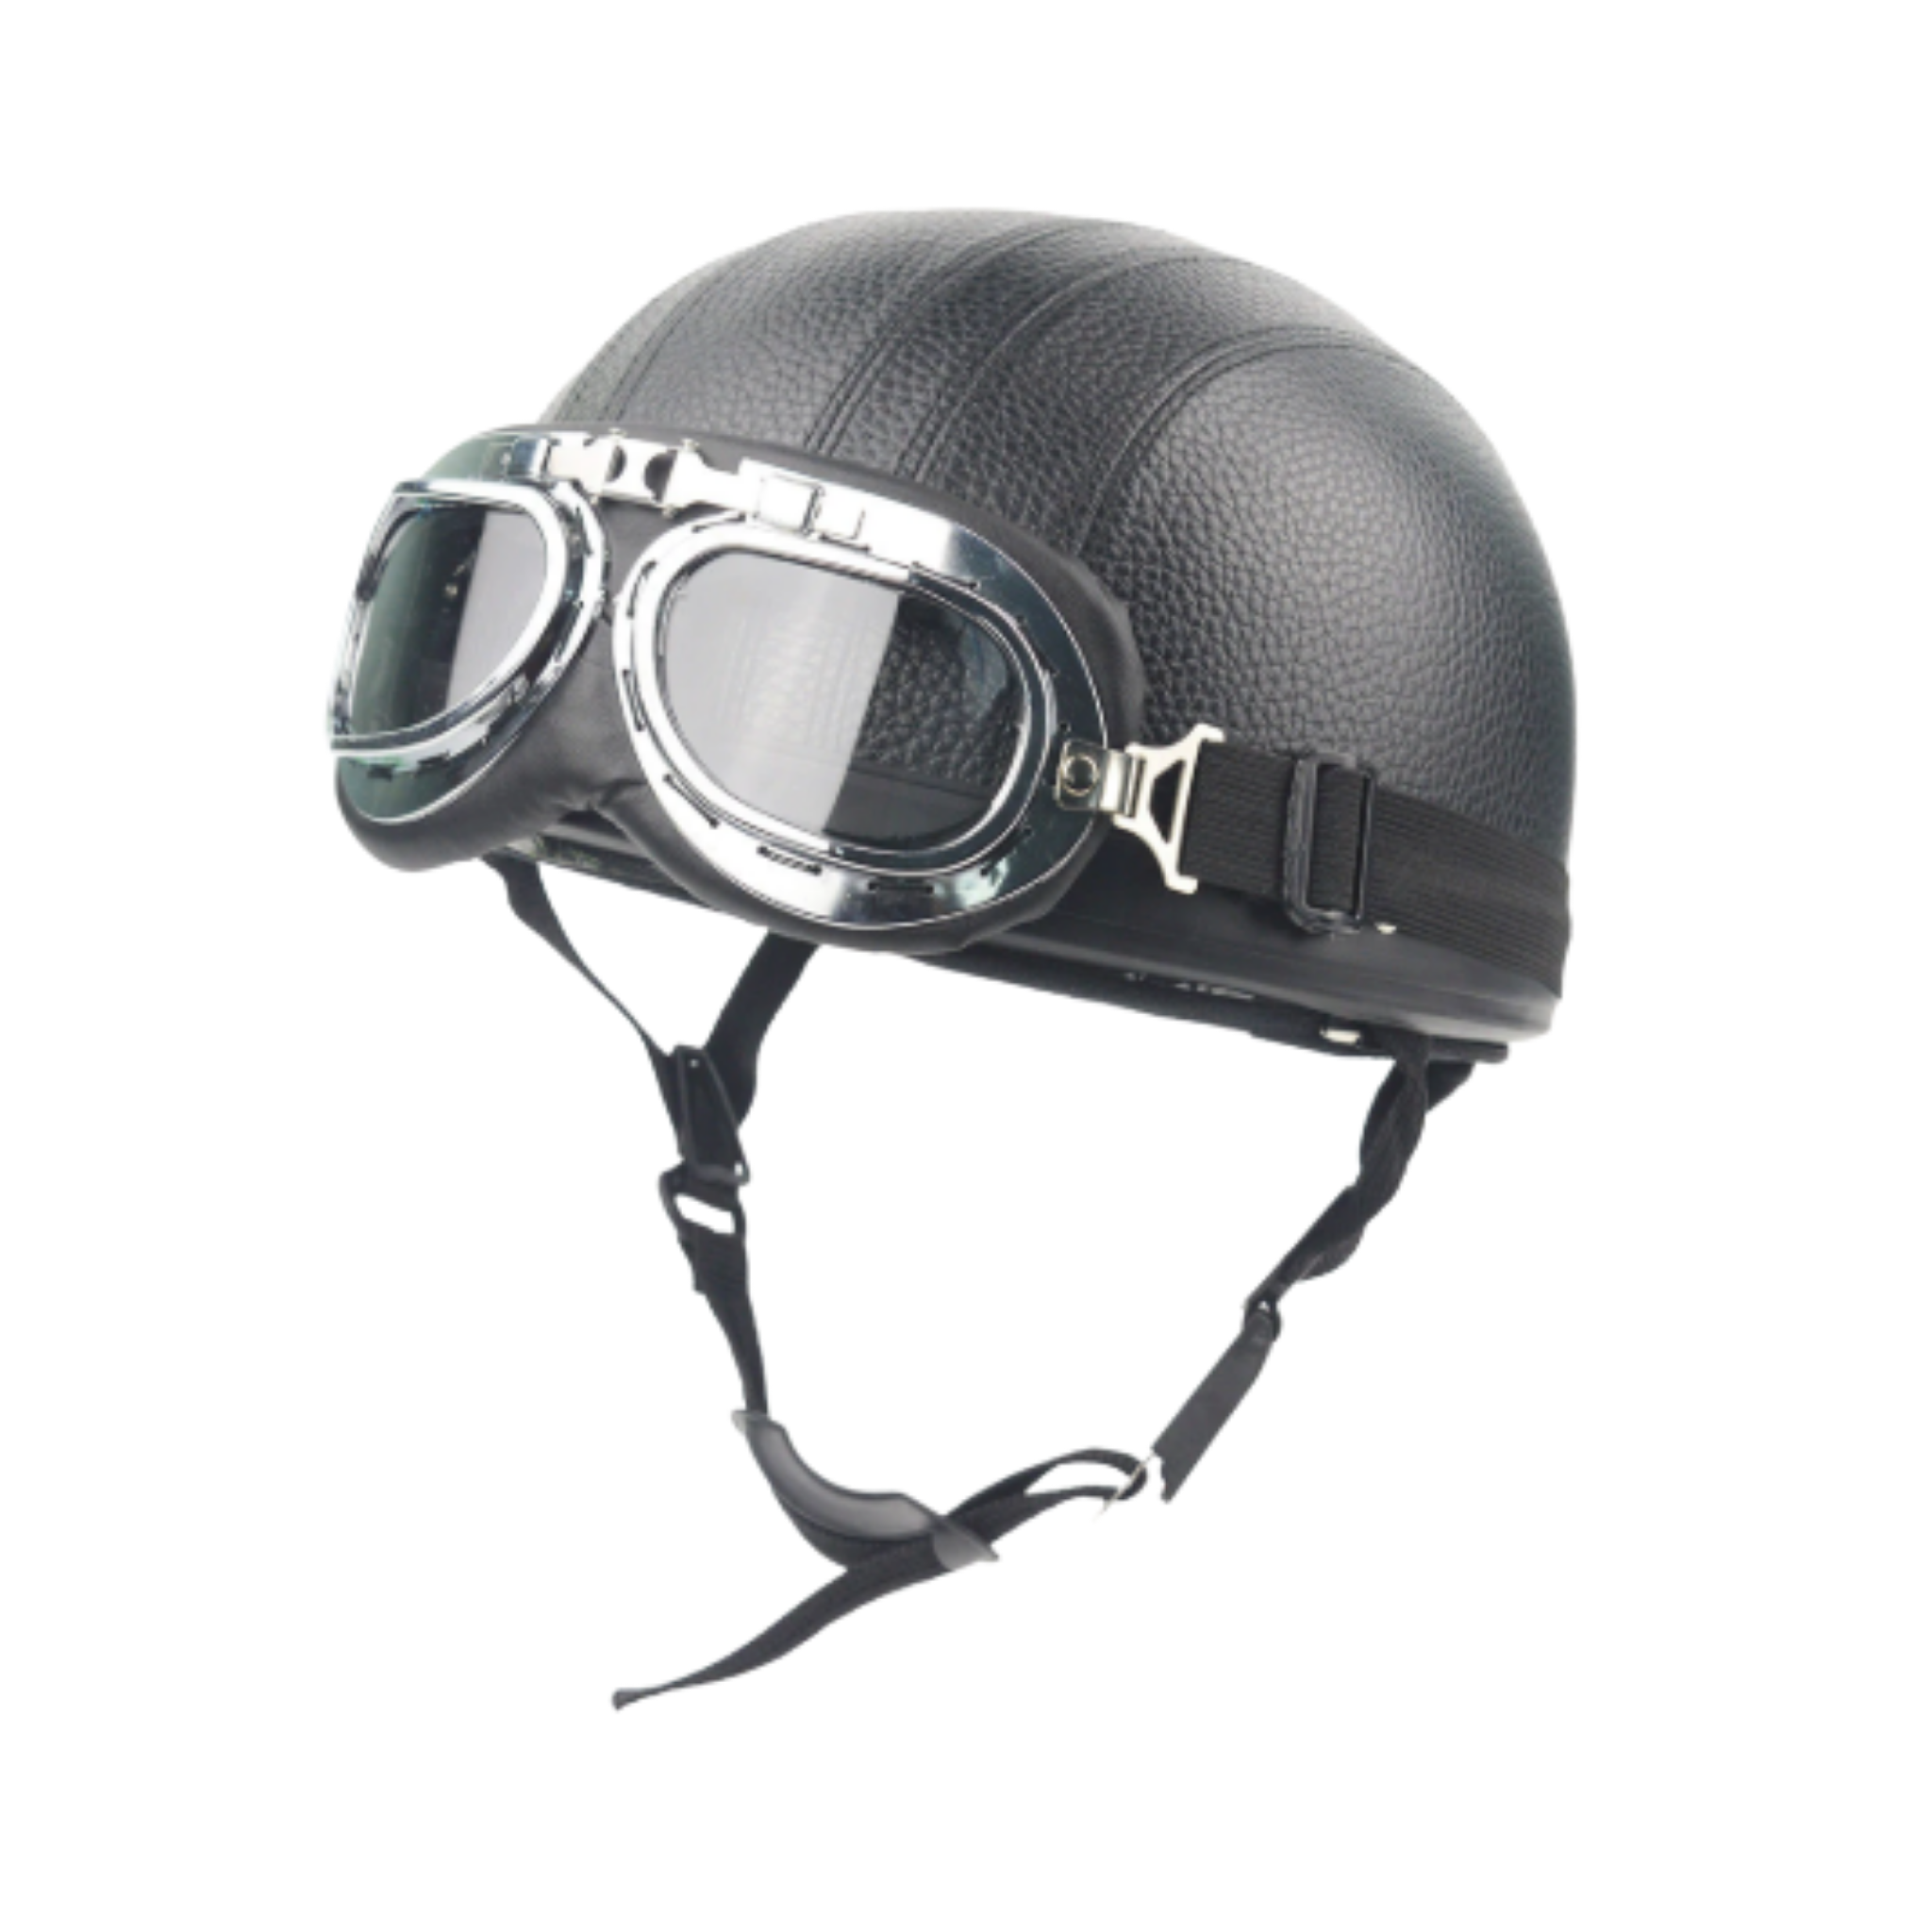 retro cafe racer style motoring helmet showing aviator goggles and comfort chin strap